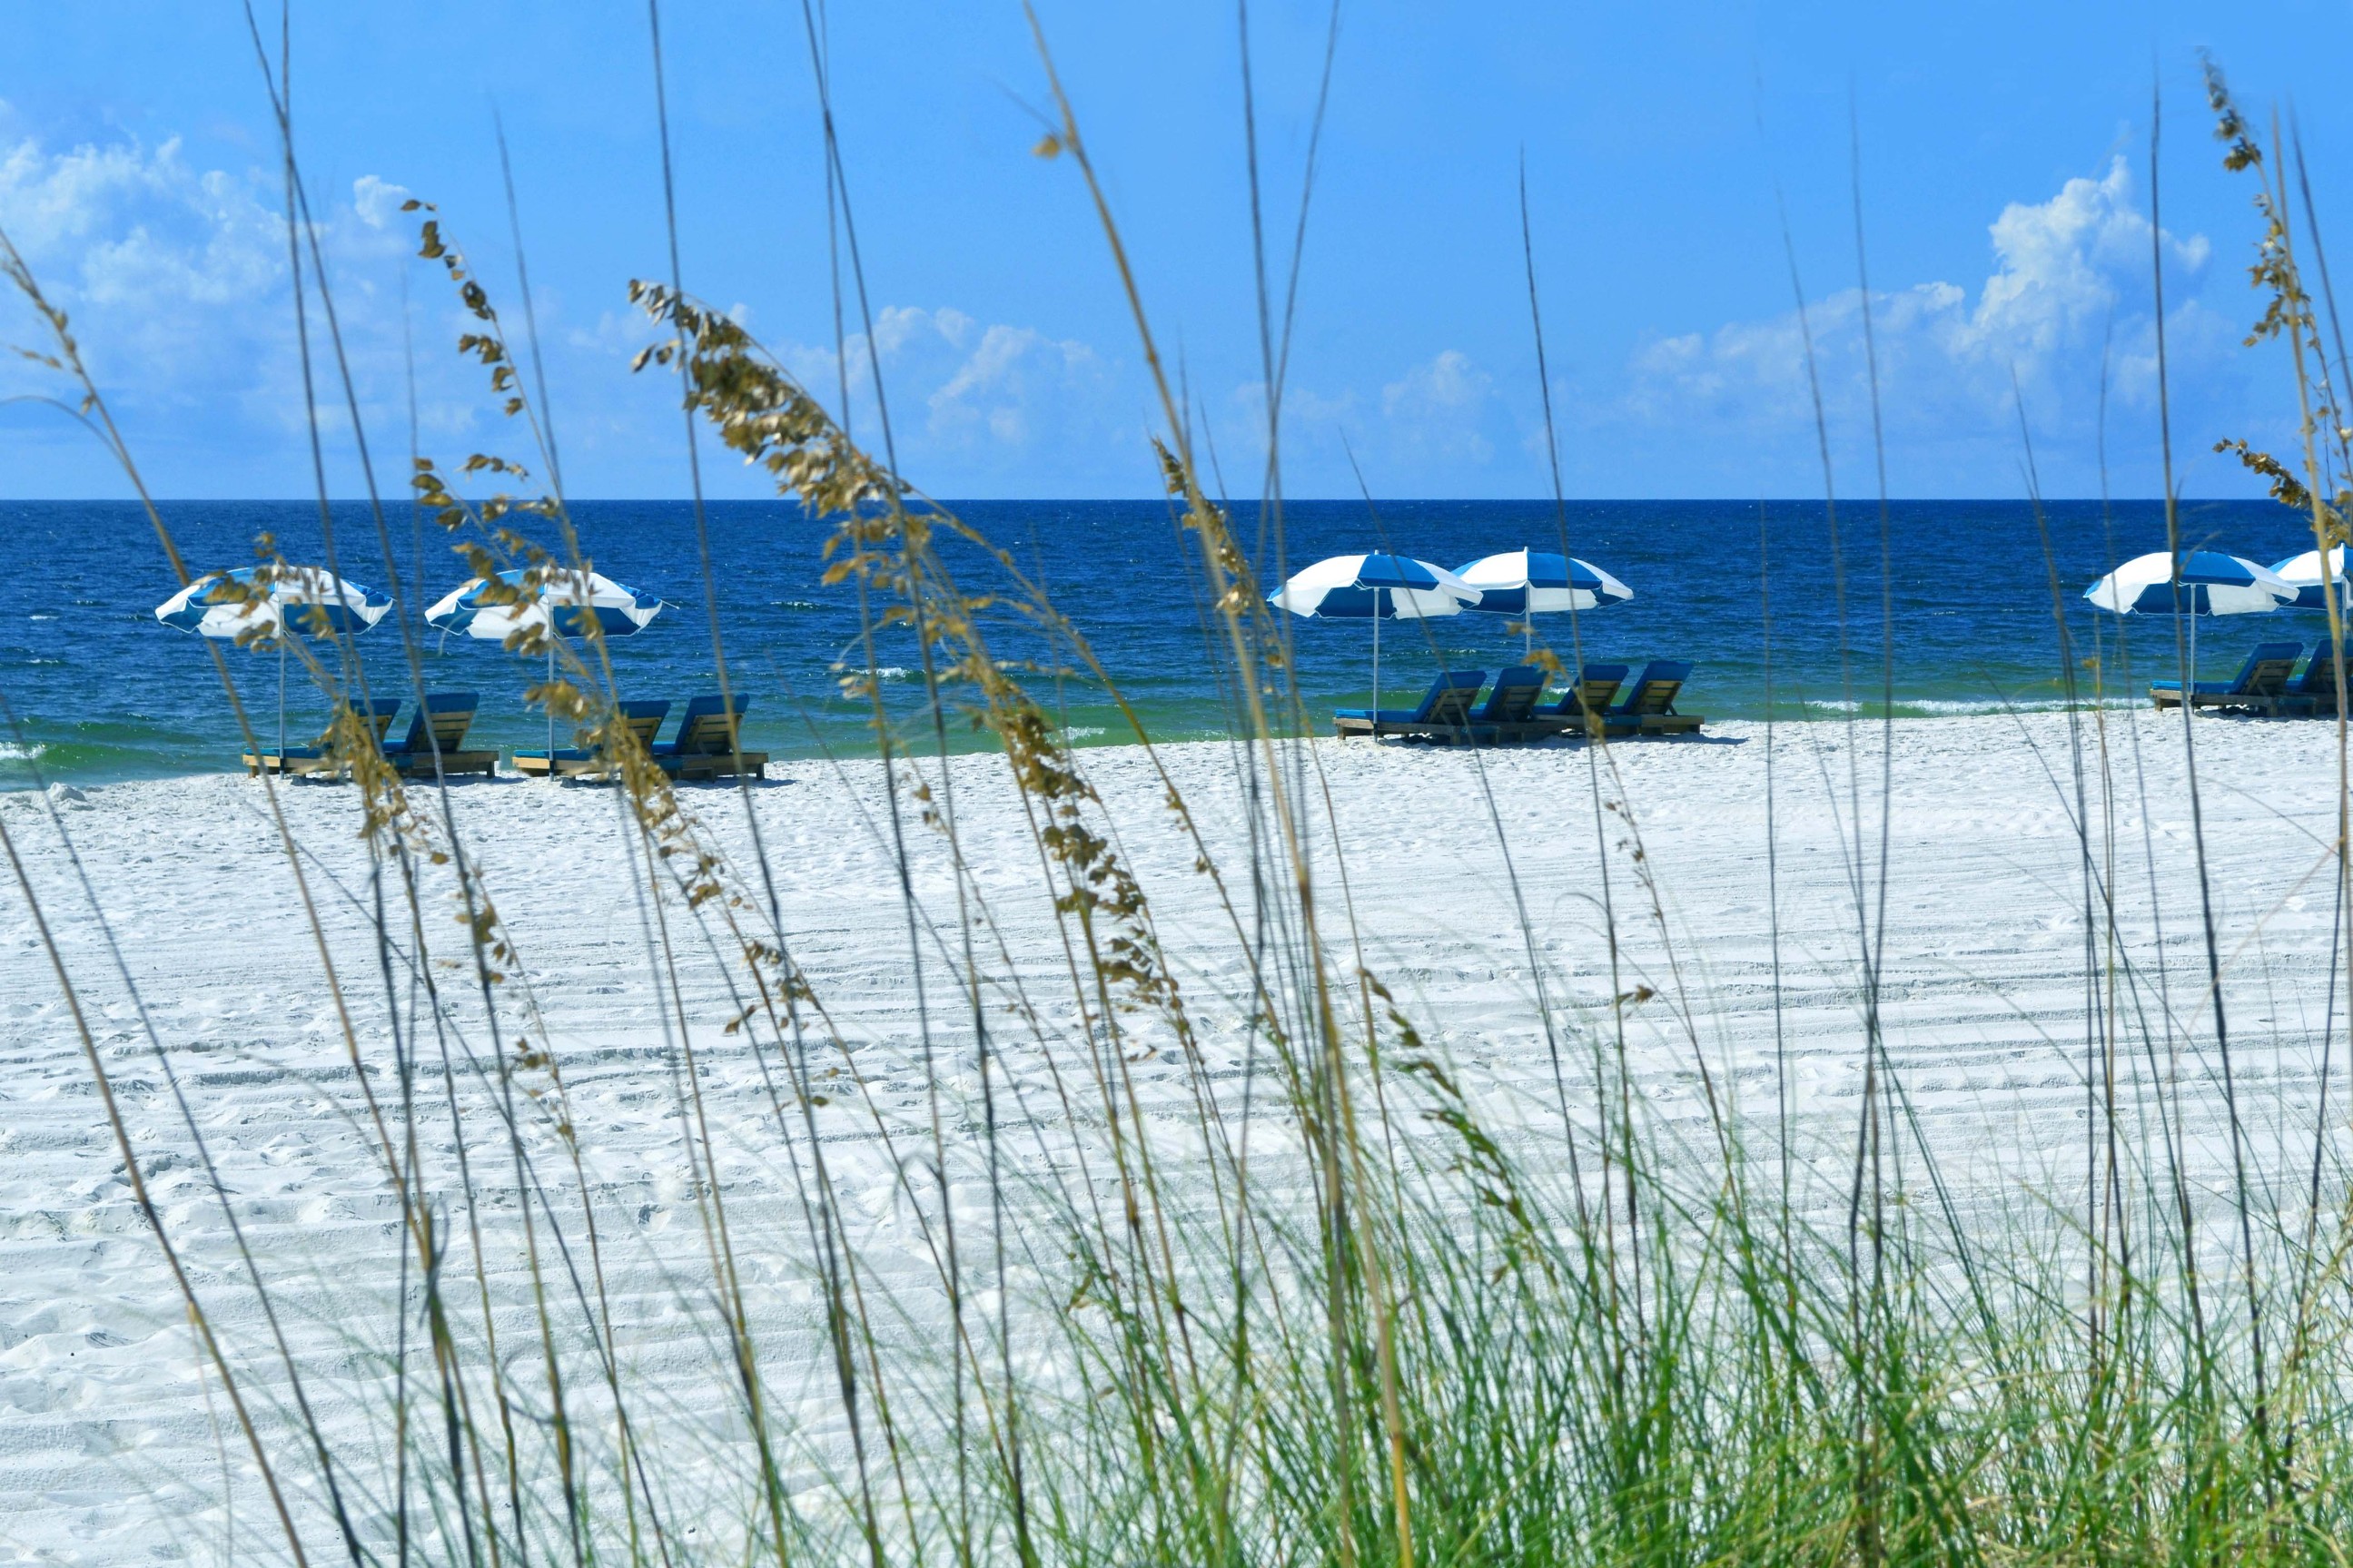 Dune grass and the soft white sand